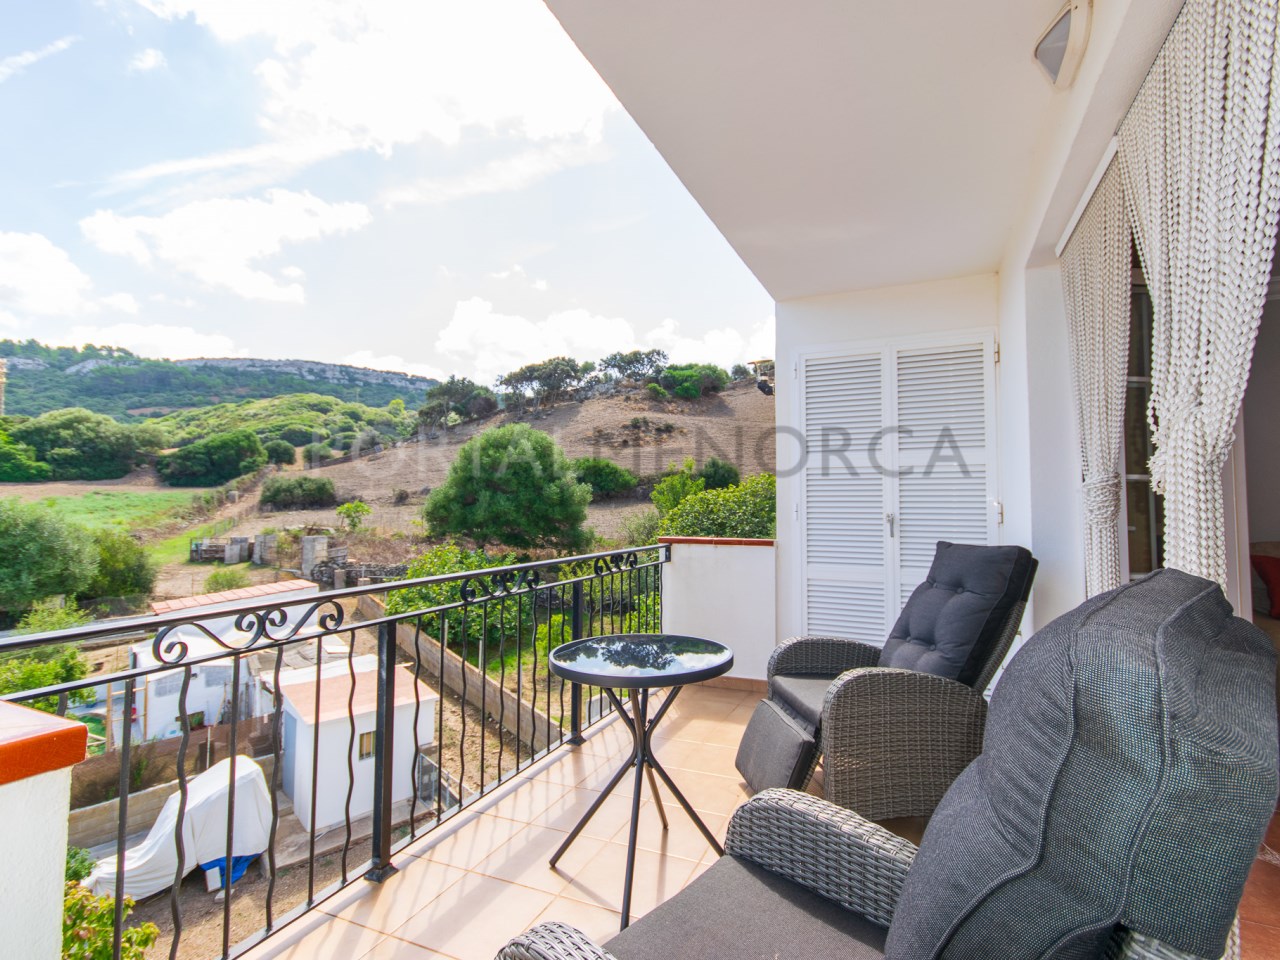 Duplex with 2 terraces and great views